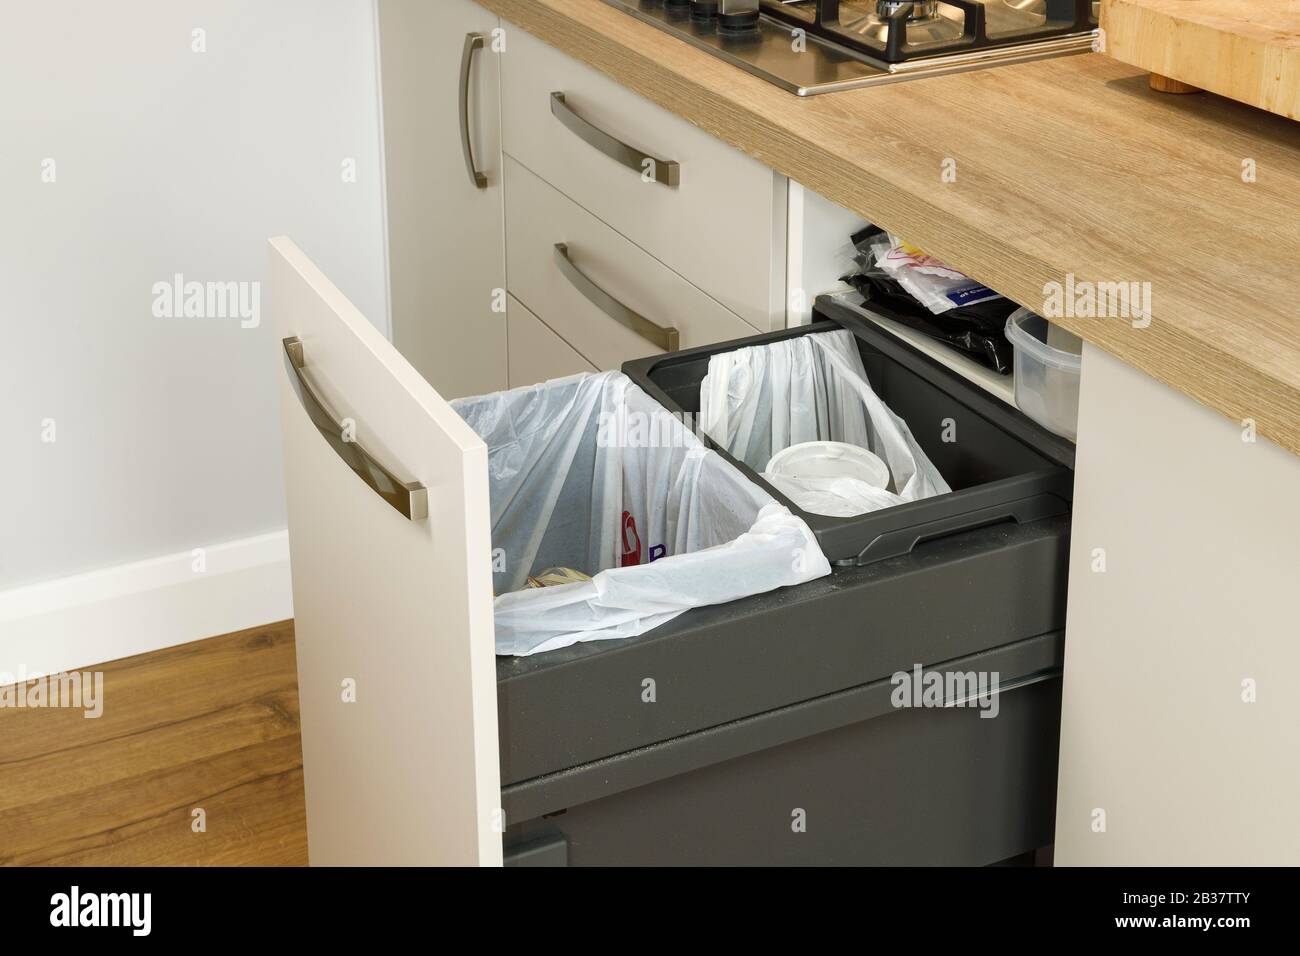 Pull out recycling bins in a modern kitchen Stock Photo